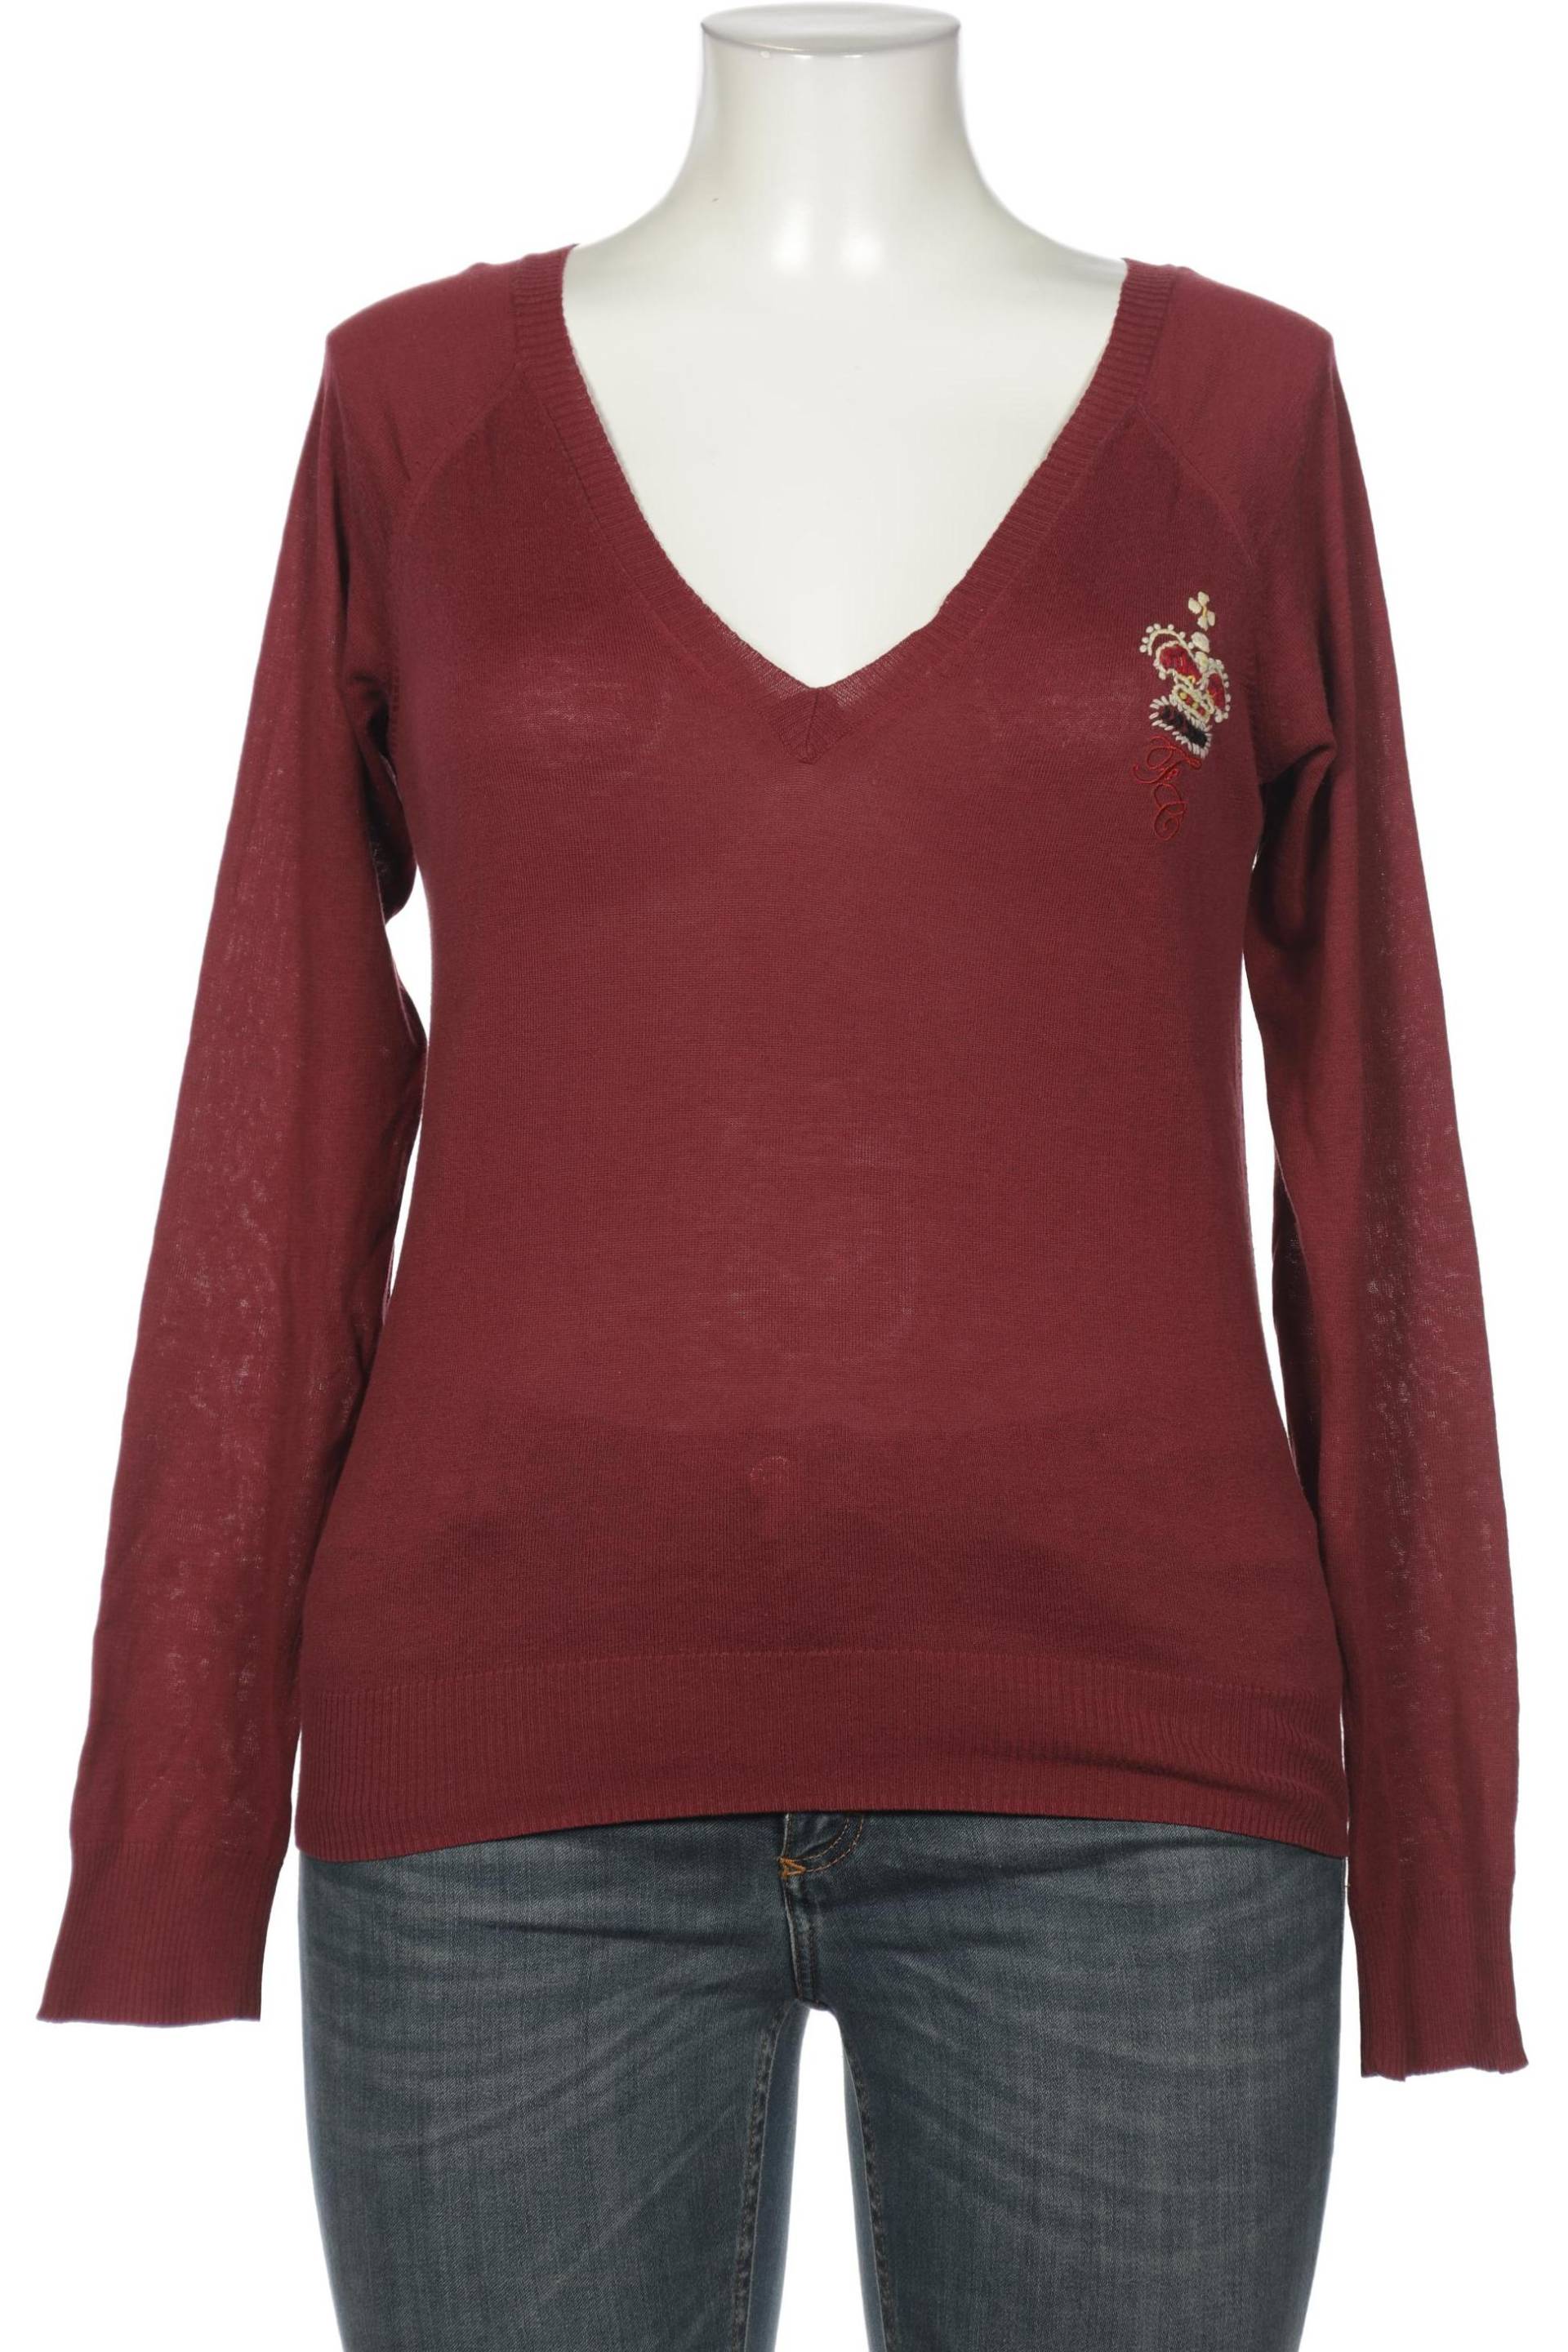 French Connection Damen Pullover, bordeaux von French Connection